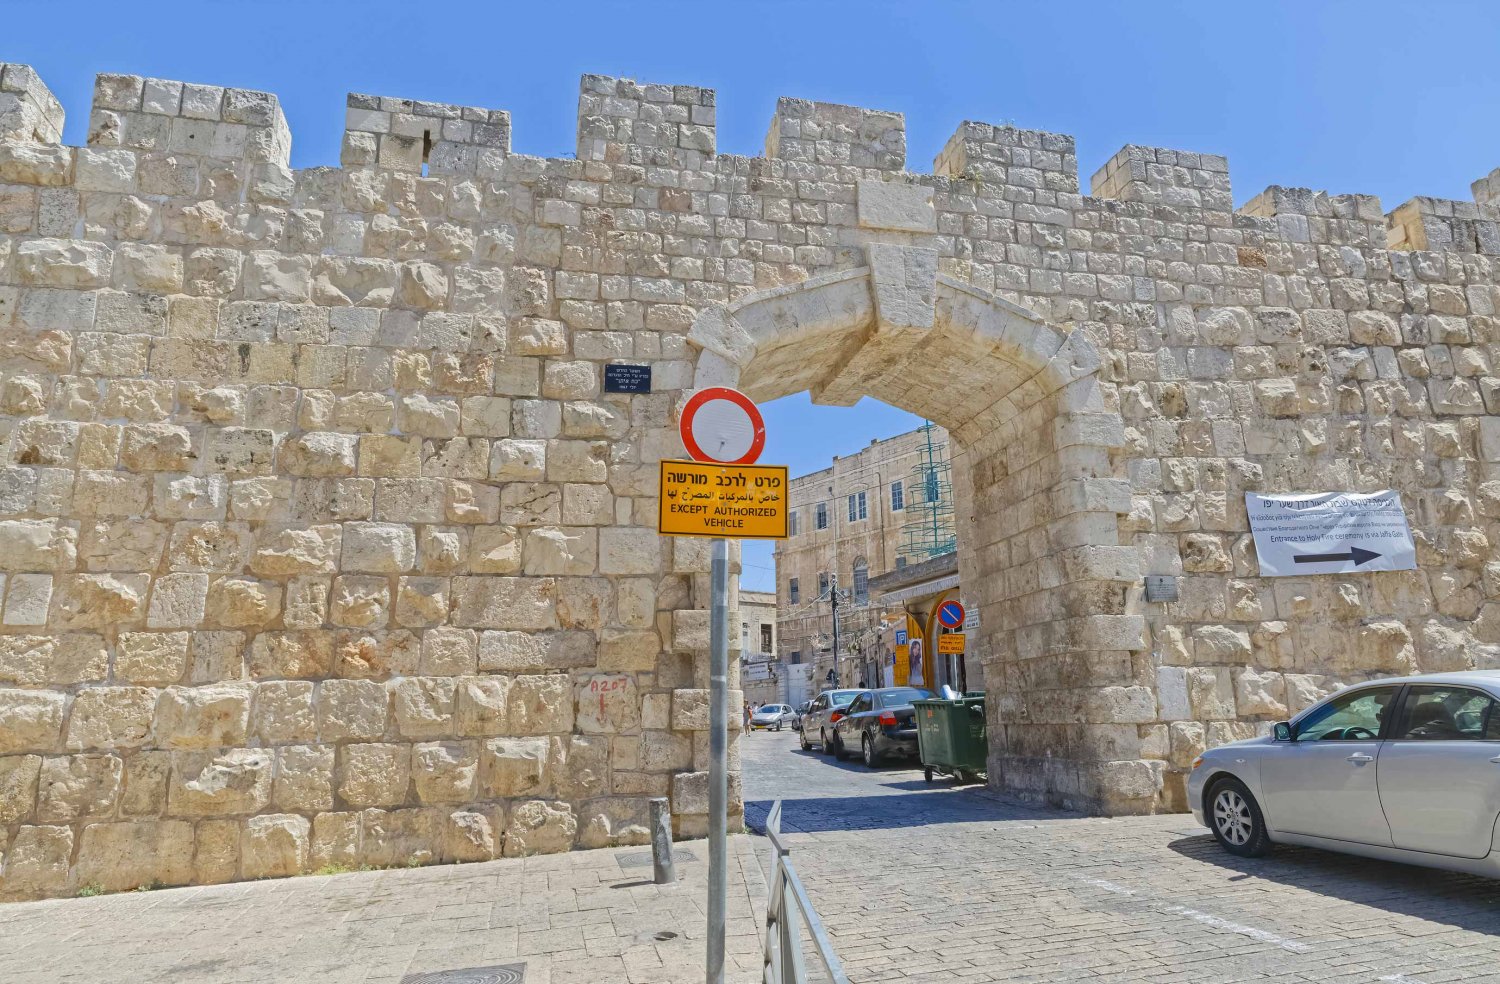 New Gate or Bab al-Jadid, one of the gates to Jerusalem's Old City